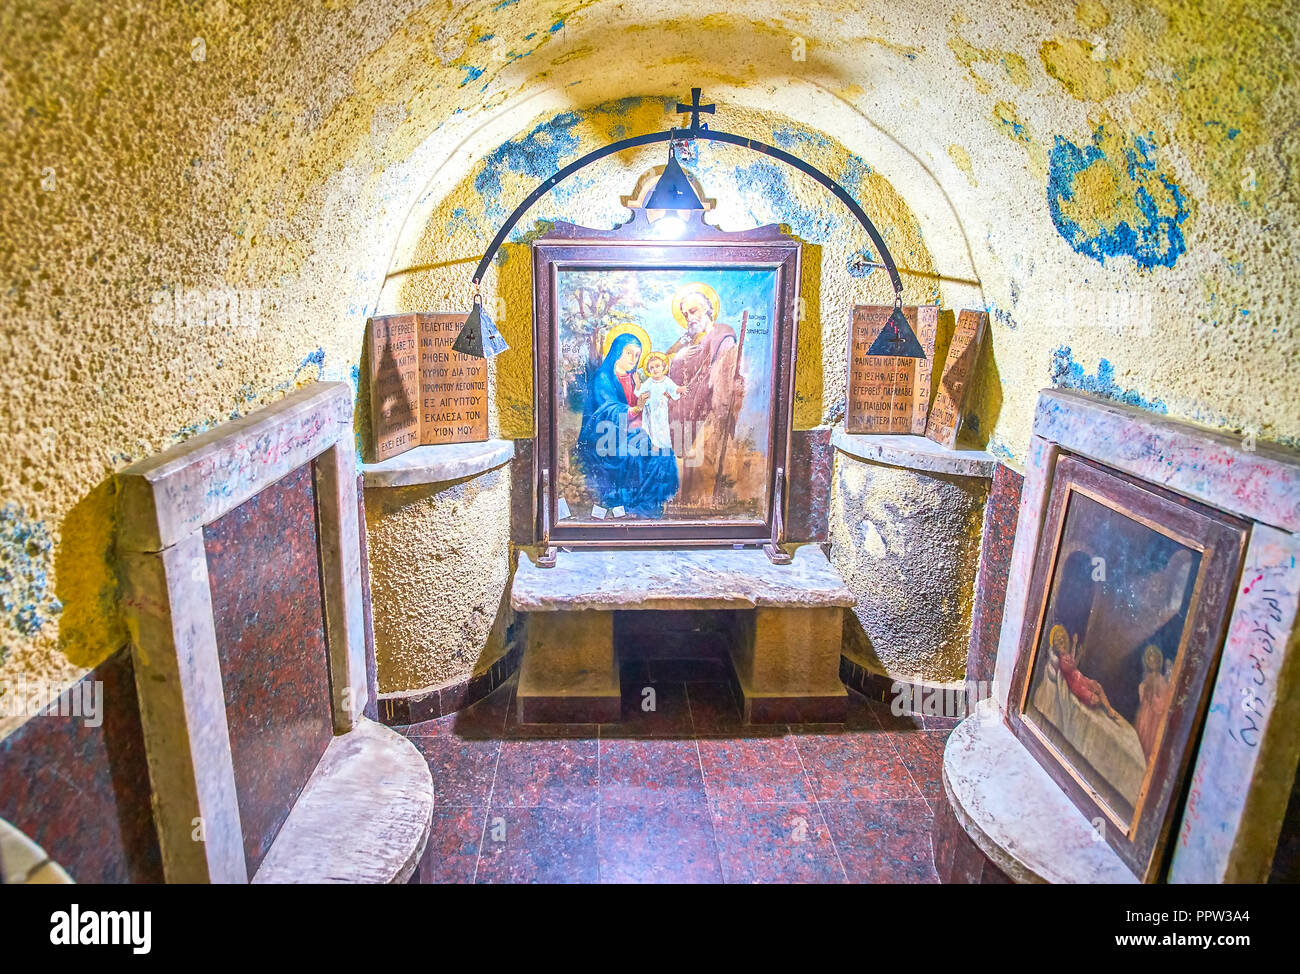 CAIRO, EGYPT - DECEMBER 23, 2017: The small Grotto in Assumption of Virgin Mary Church, the hiding place of the Holy Family during their flight into E Stock Photo